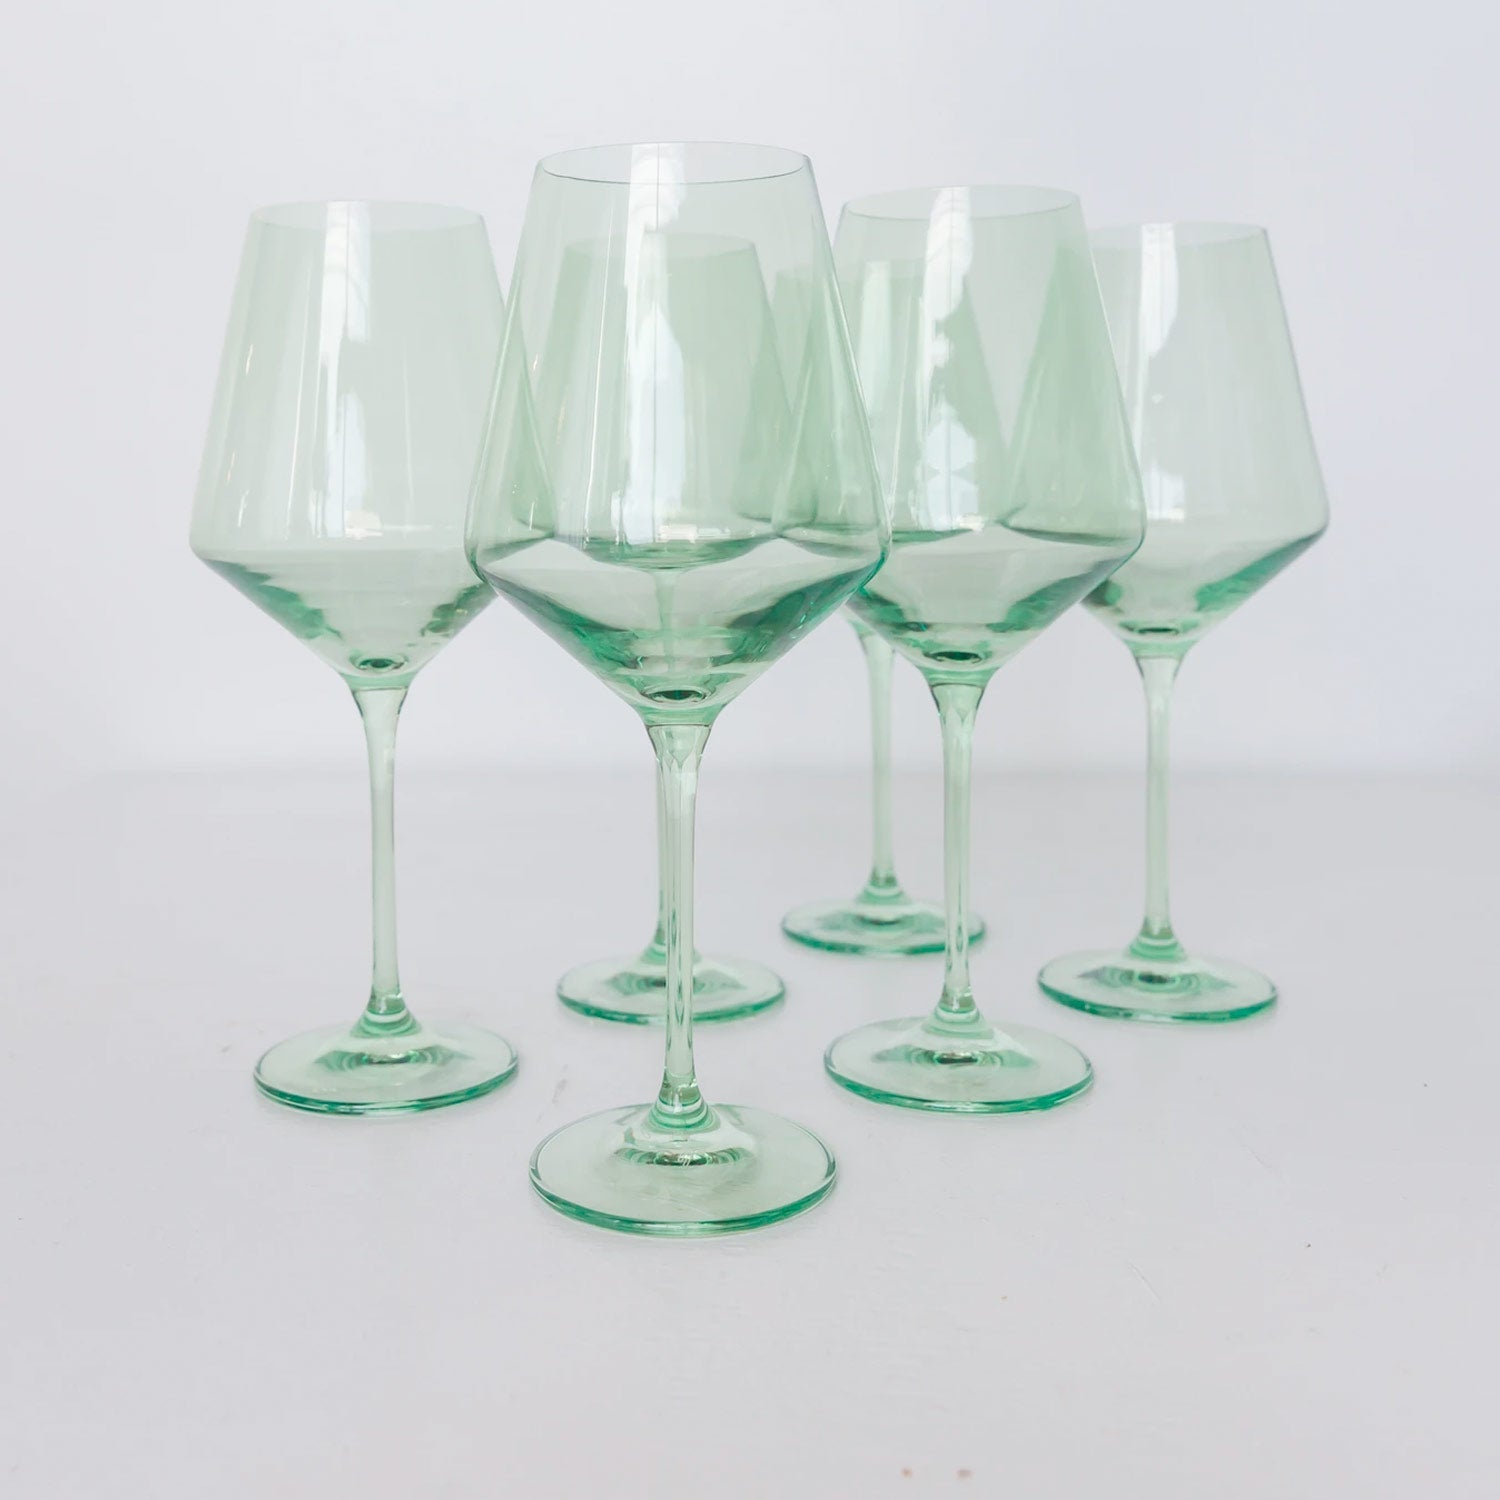 Six stemmed wine glasses made of green colored glass